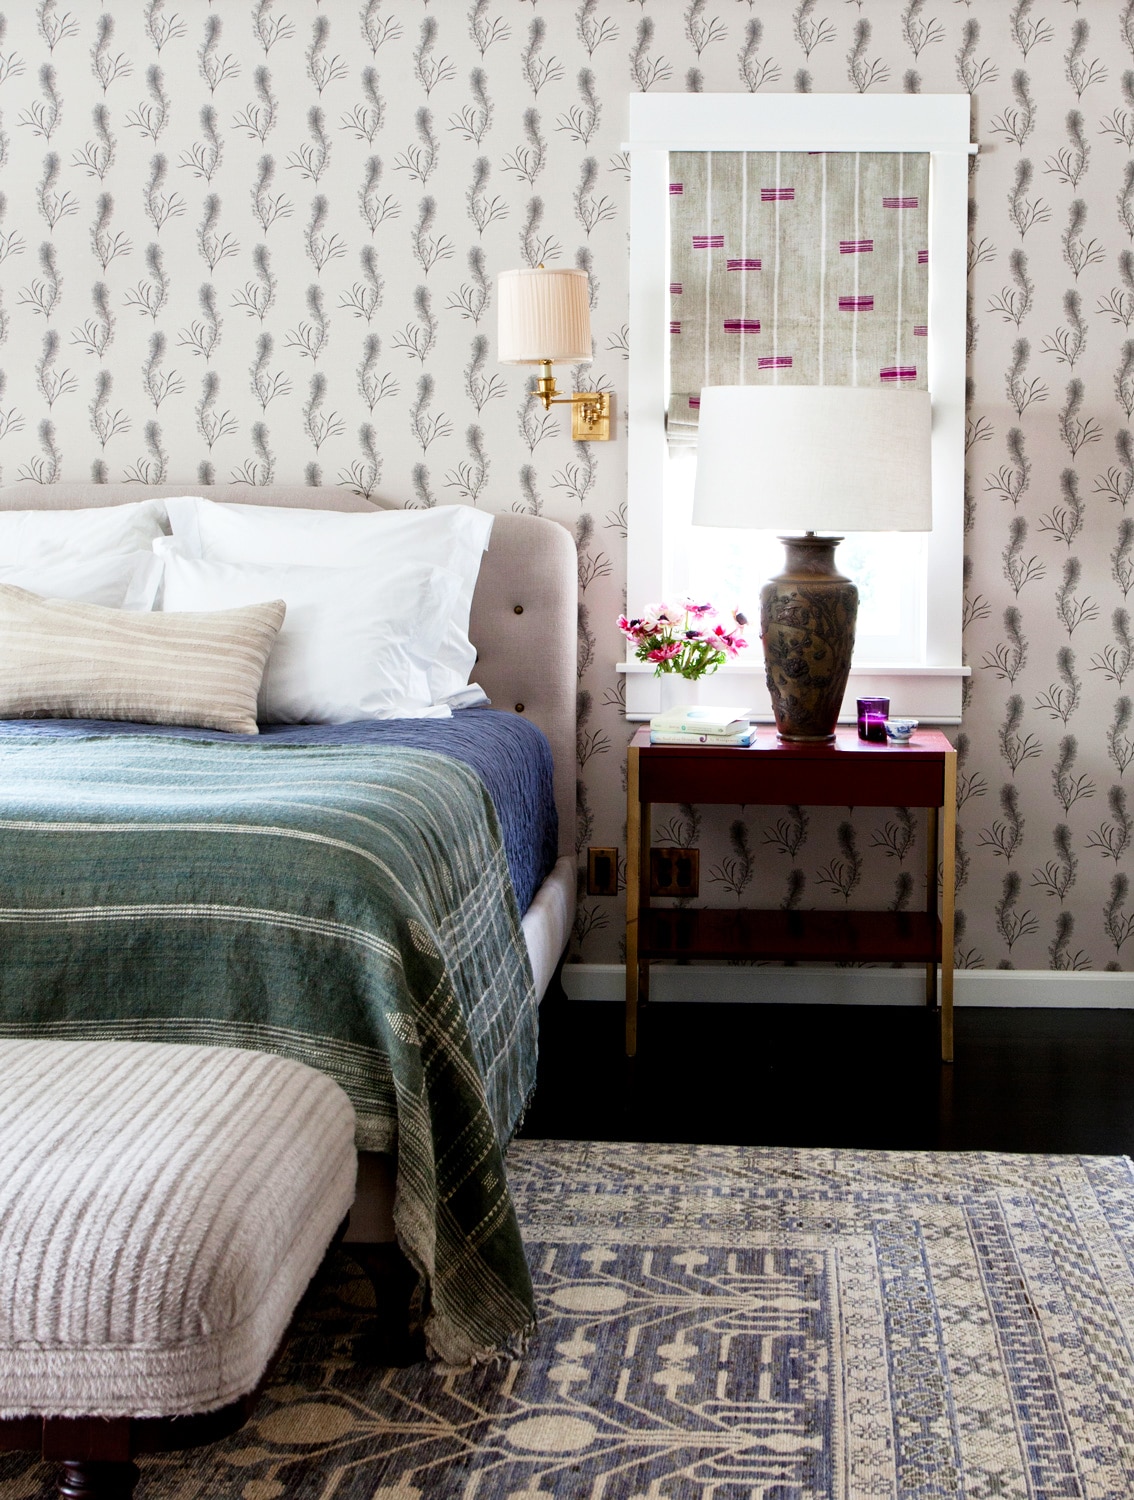 bedroom layers with perfect palette and pattern | house tour via coco kelley